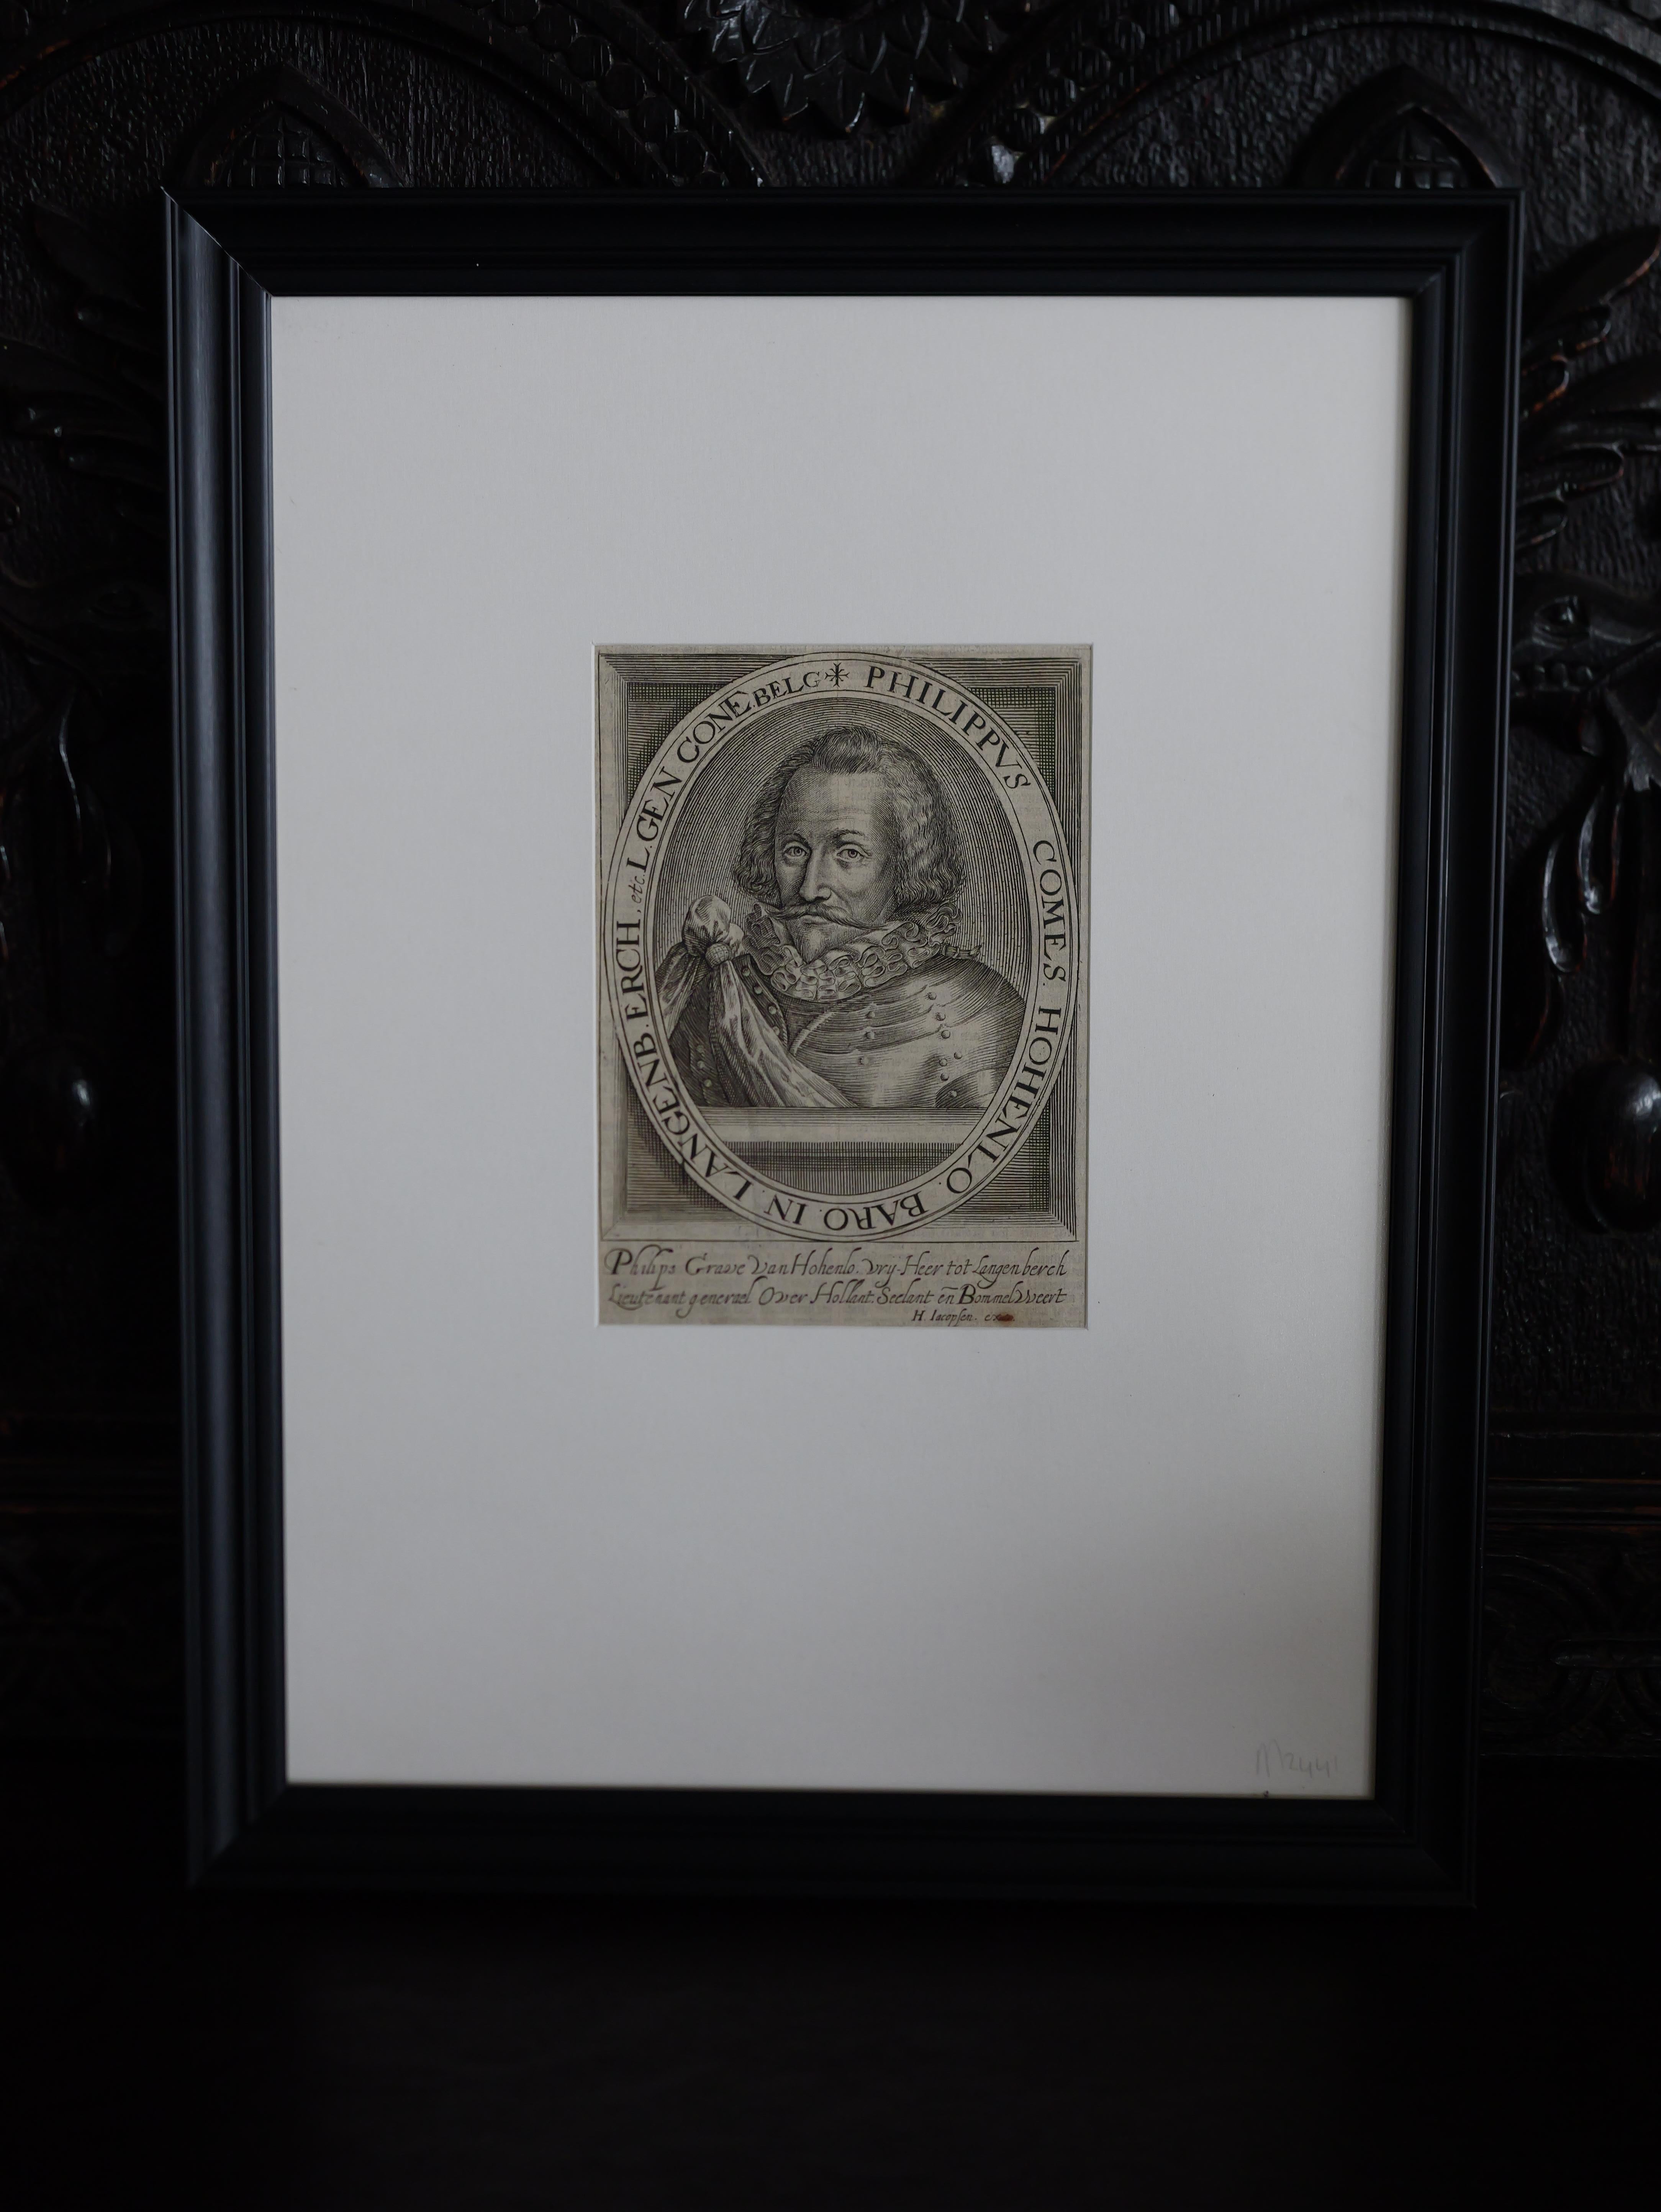 This antique portrait engraving of Philip of Hohenlohe-Neuenstein, created by the renowned engraver Emanuel van Meteren in 1618, is a remarkable piece of historical artwork. Van Meteren, known for his exceptional skill in capturing the likeness and